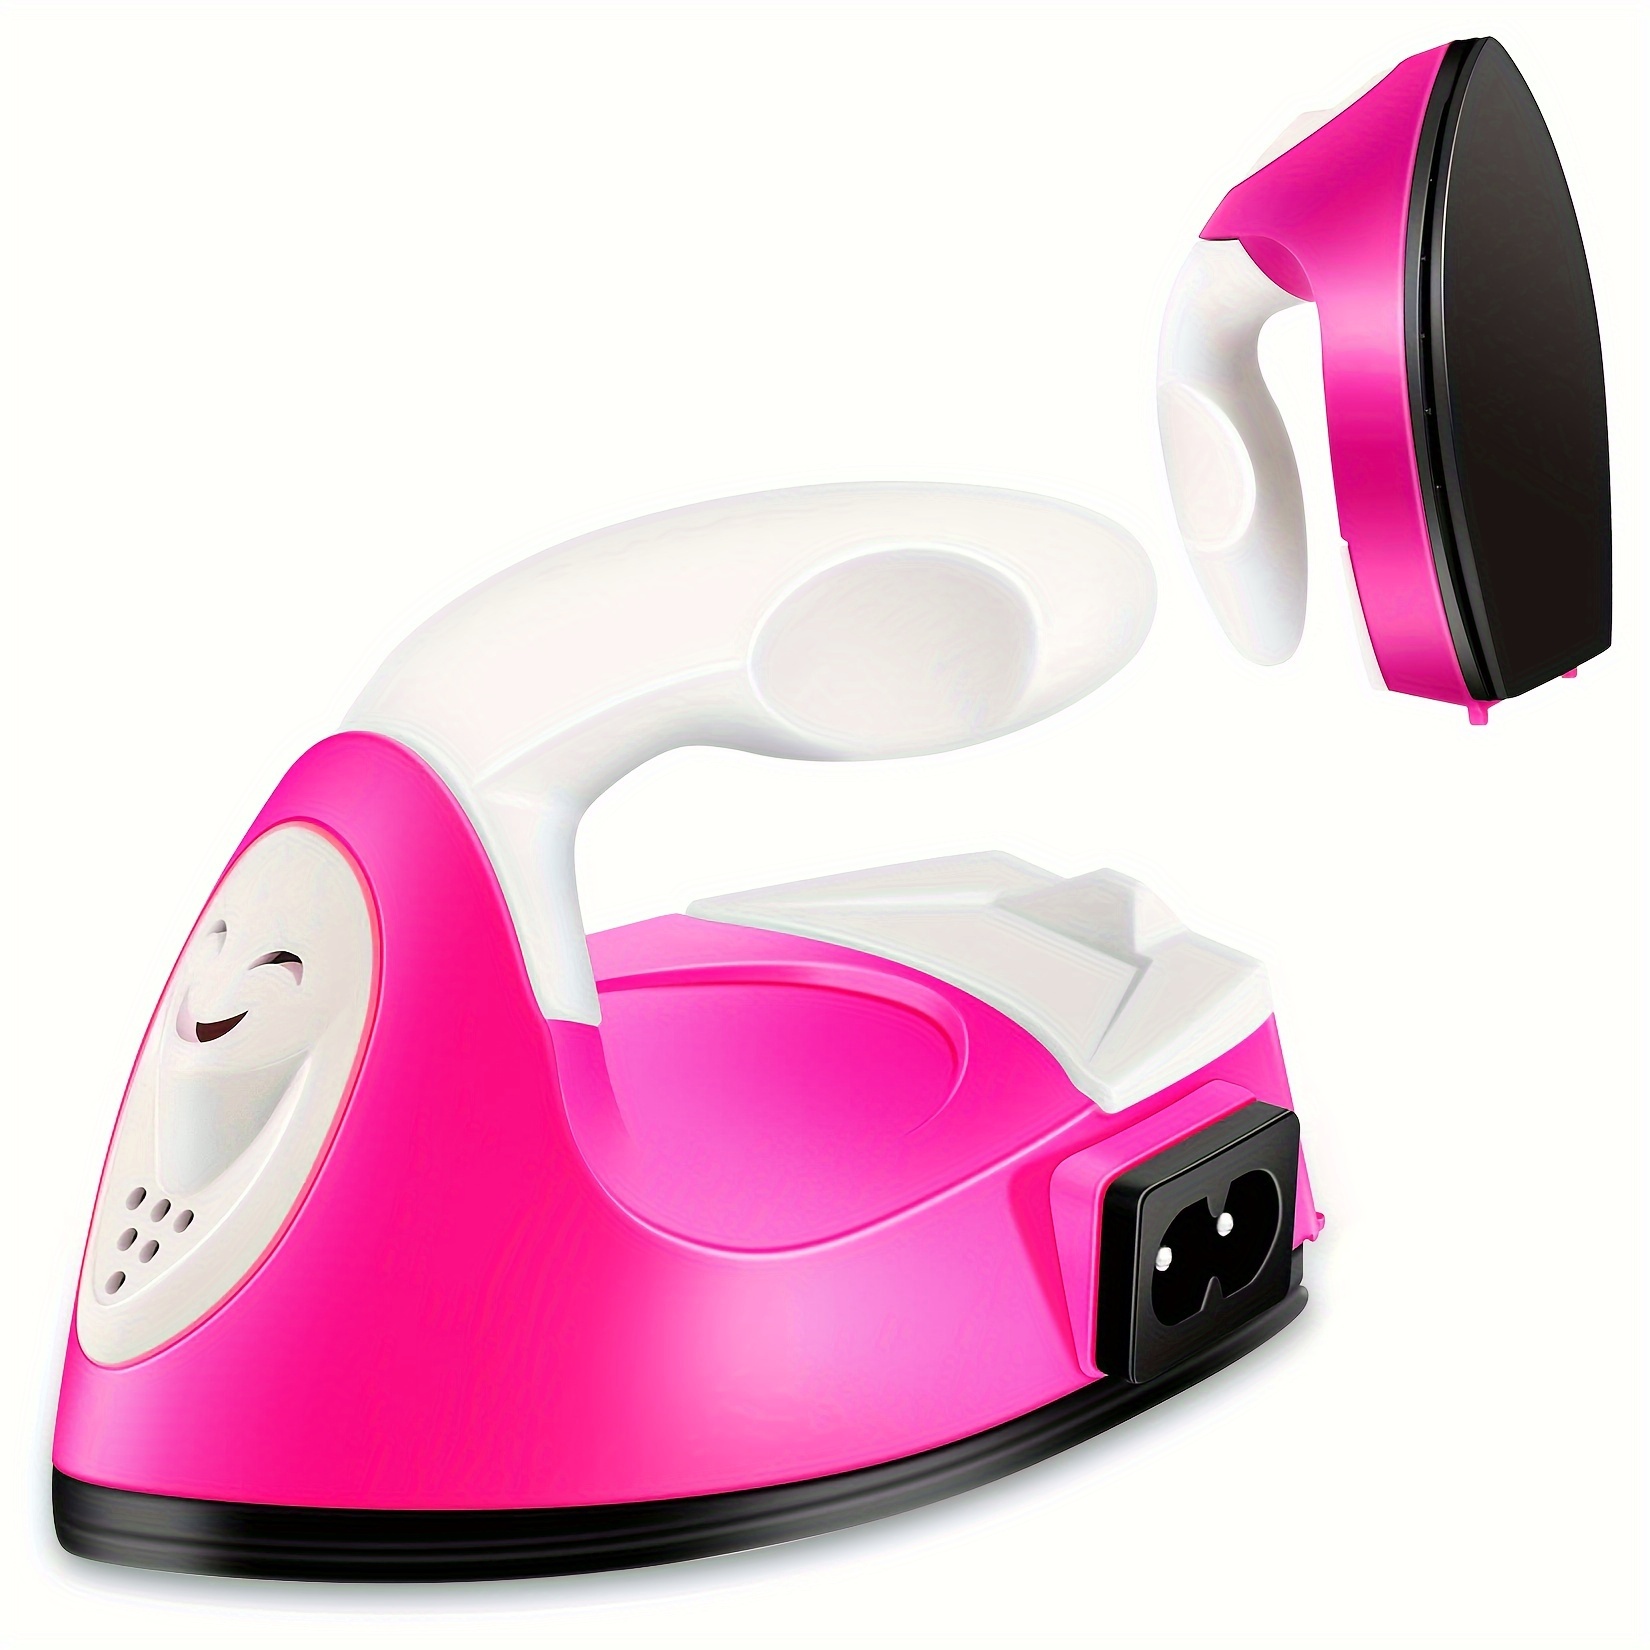 Portable Mini Electric Steam Iron For Crafting, Crafts, And Clothes Sewing  From Elseeing, $12.76